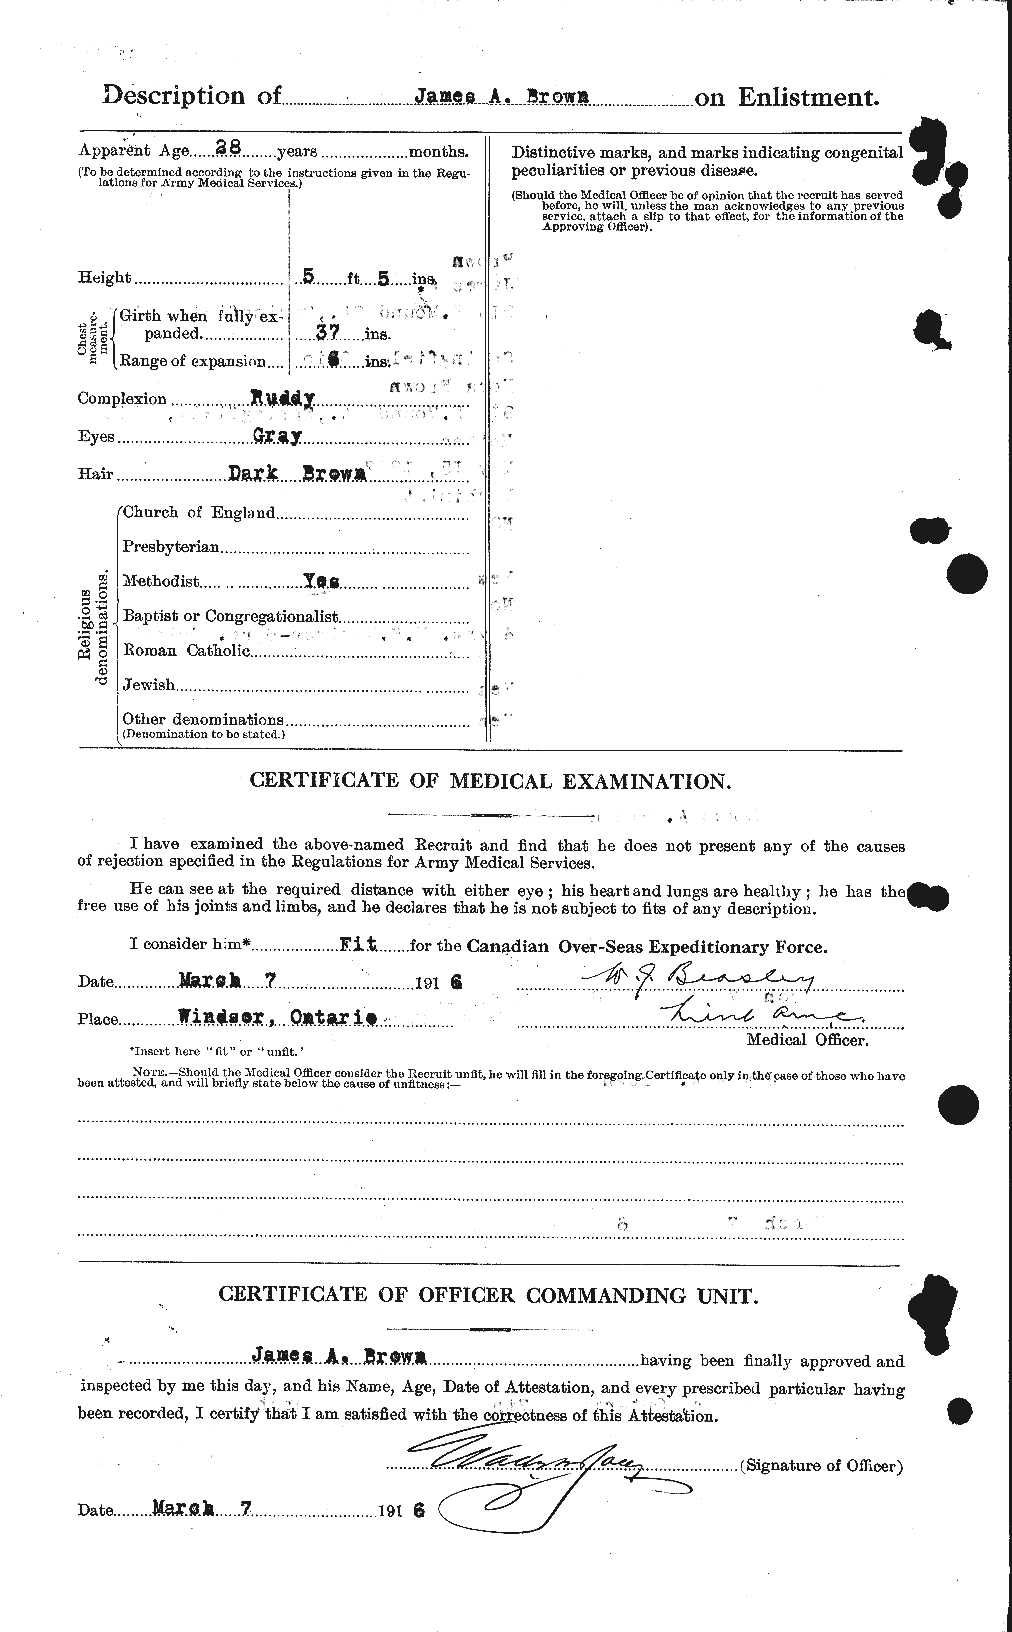 Personnel Records of the First World War - CEF 265791b